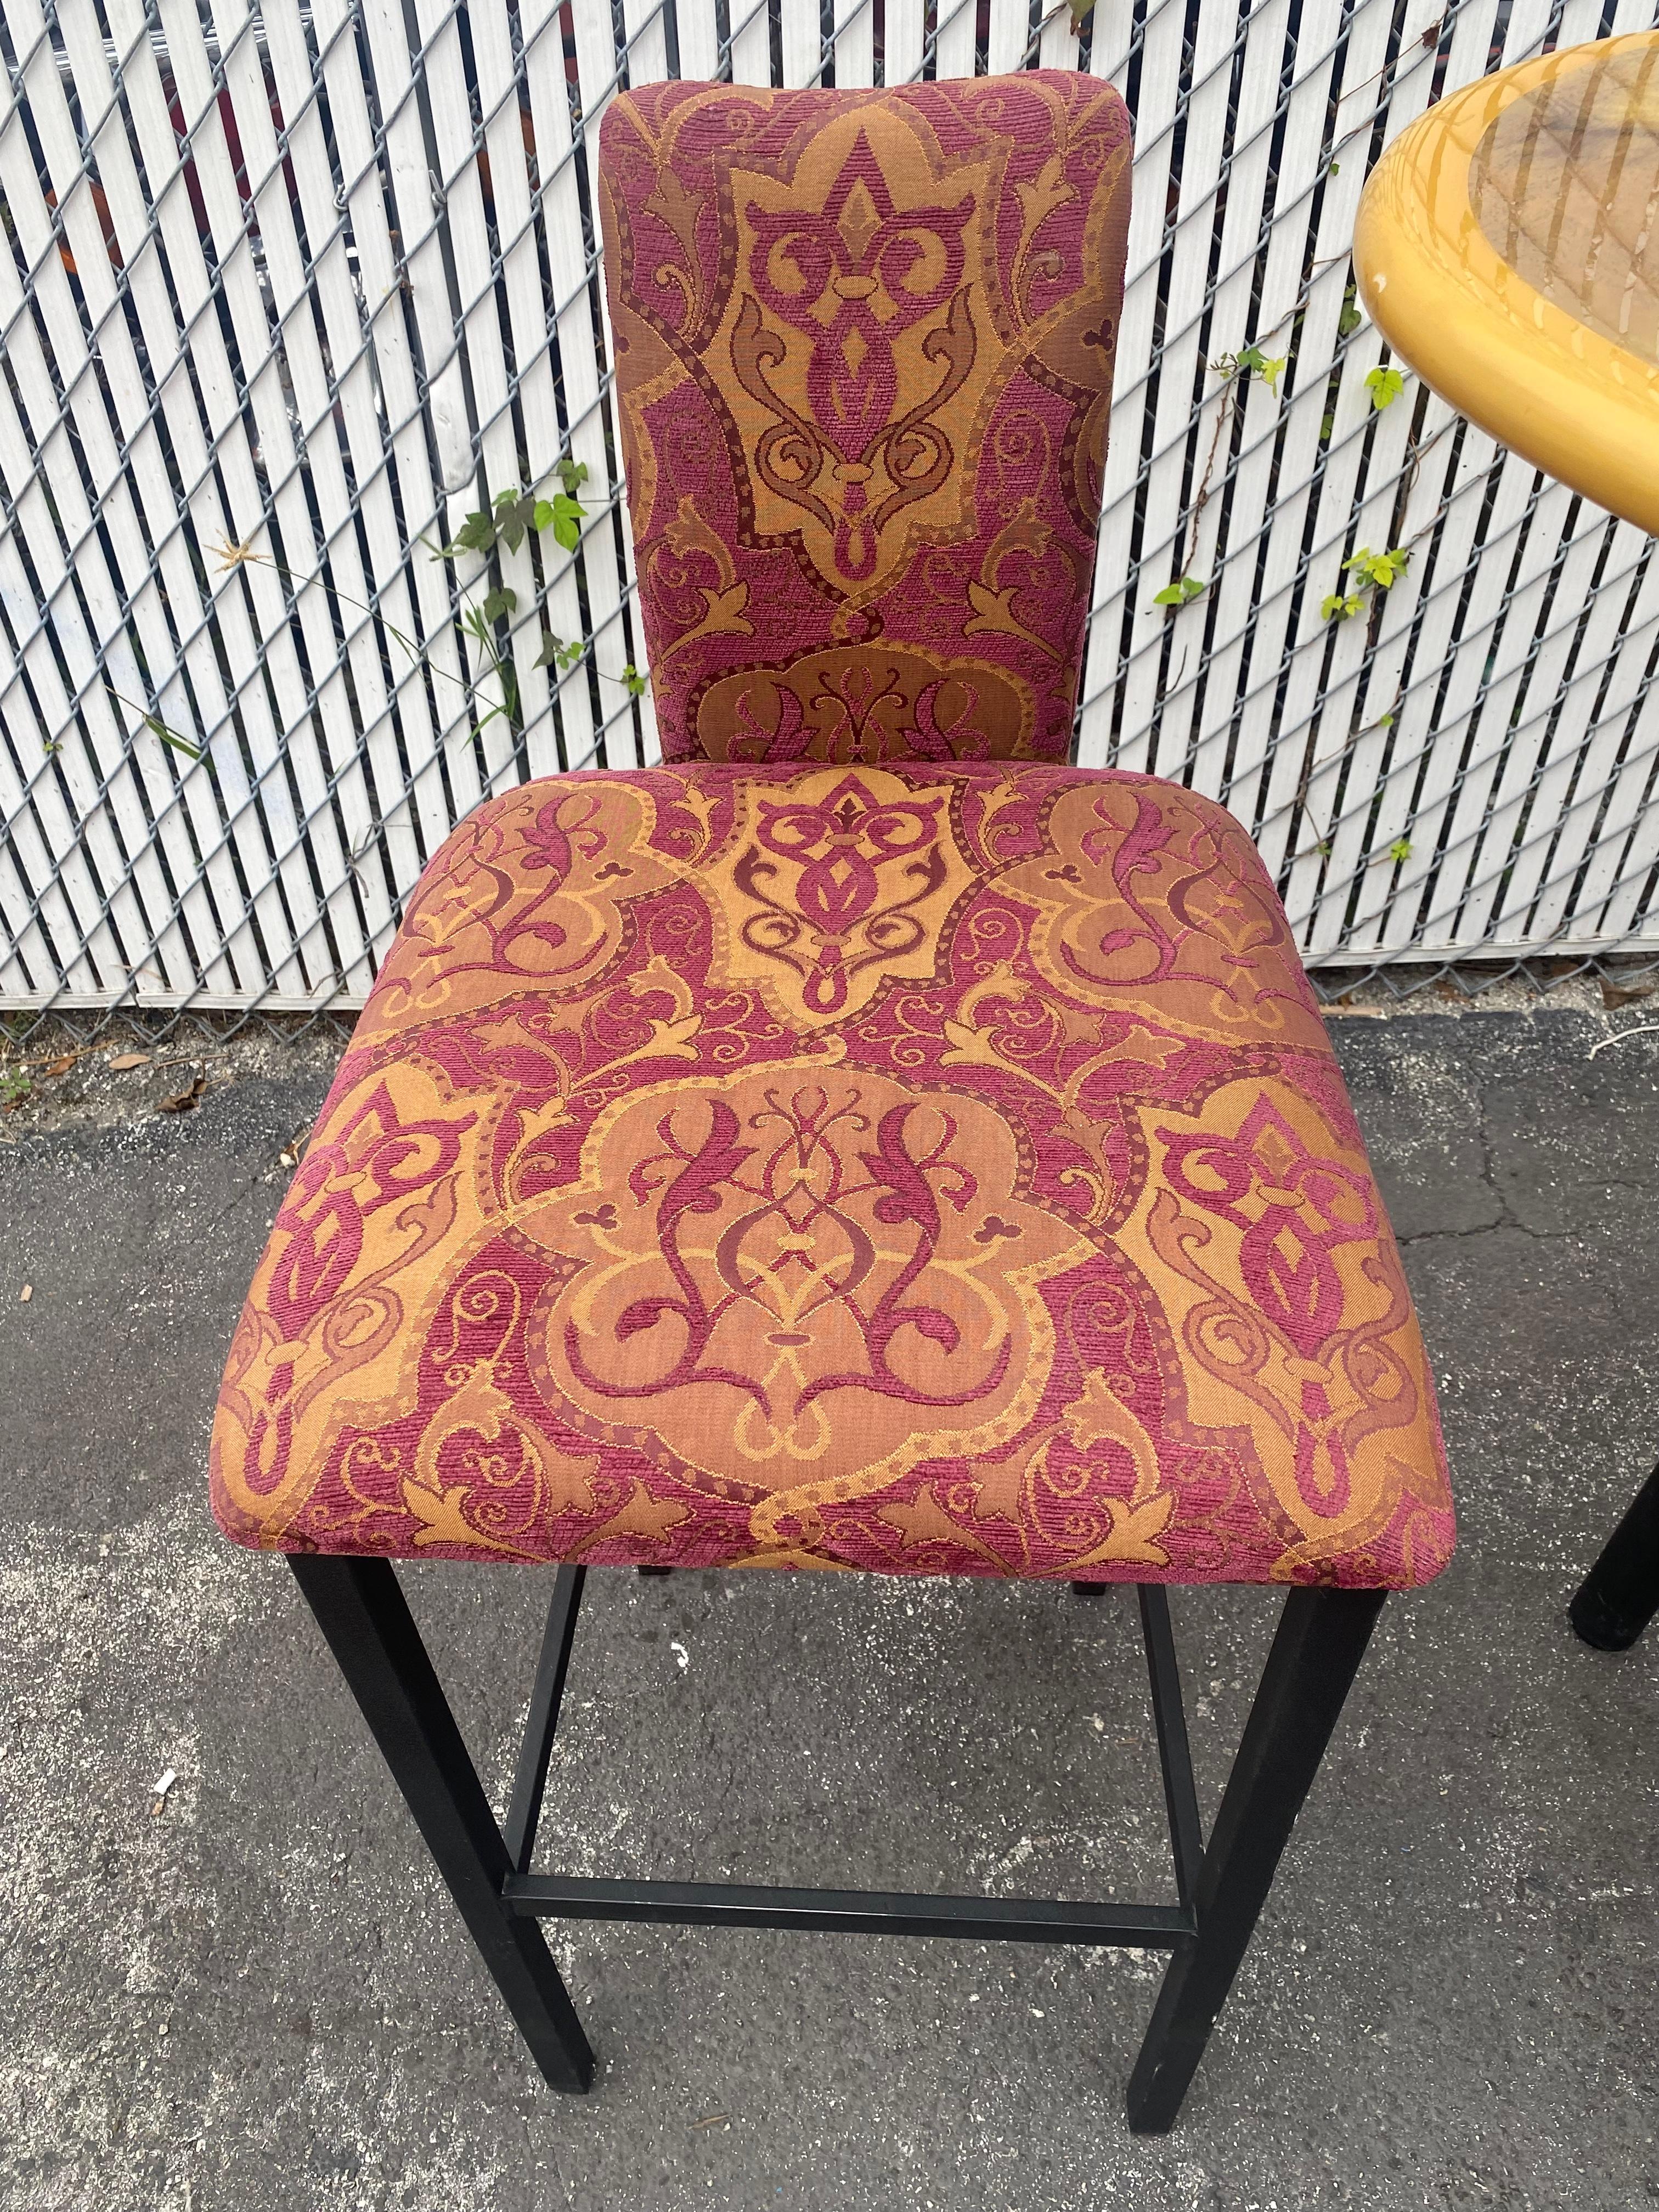 1980s Artistic Kidney Bar Pub Dining Table and Chairs, Set of 3 For Sale 7